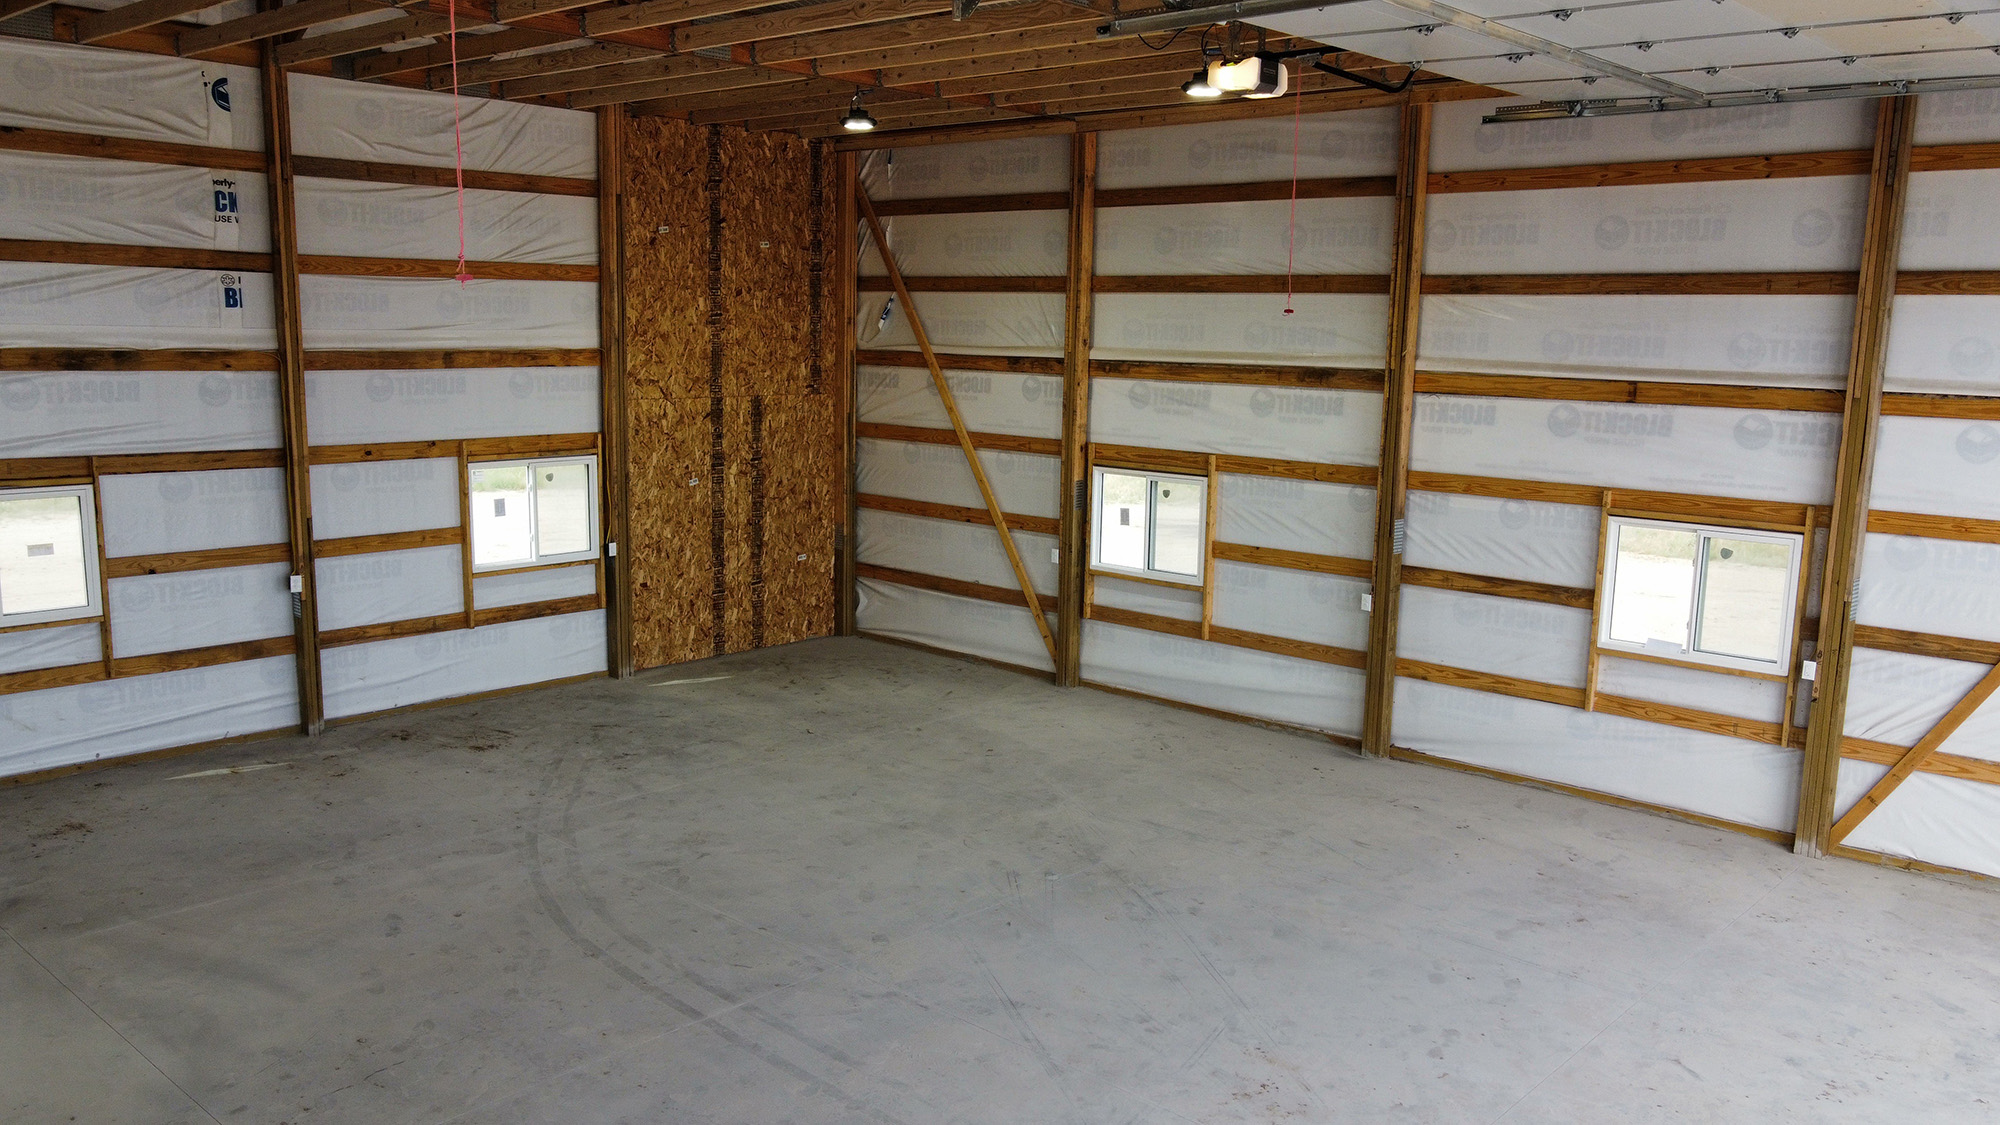 Interior of Fat Puppy Construction featured project: blue and white post frame suburban workshop